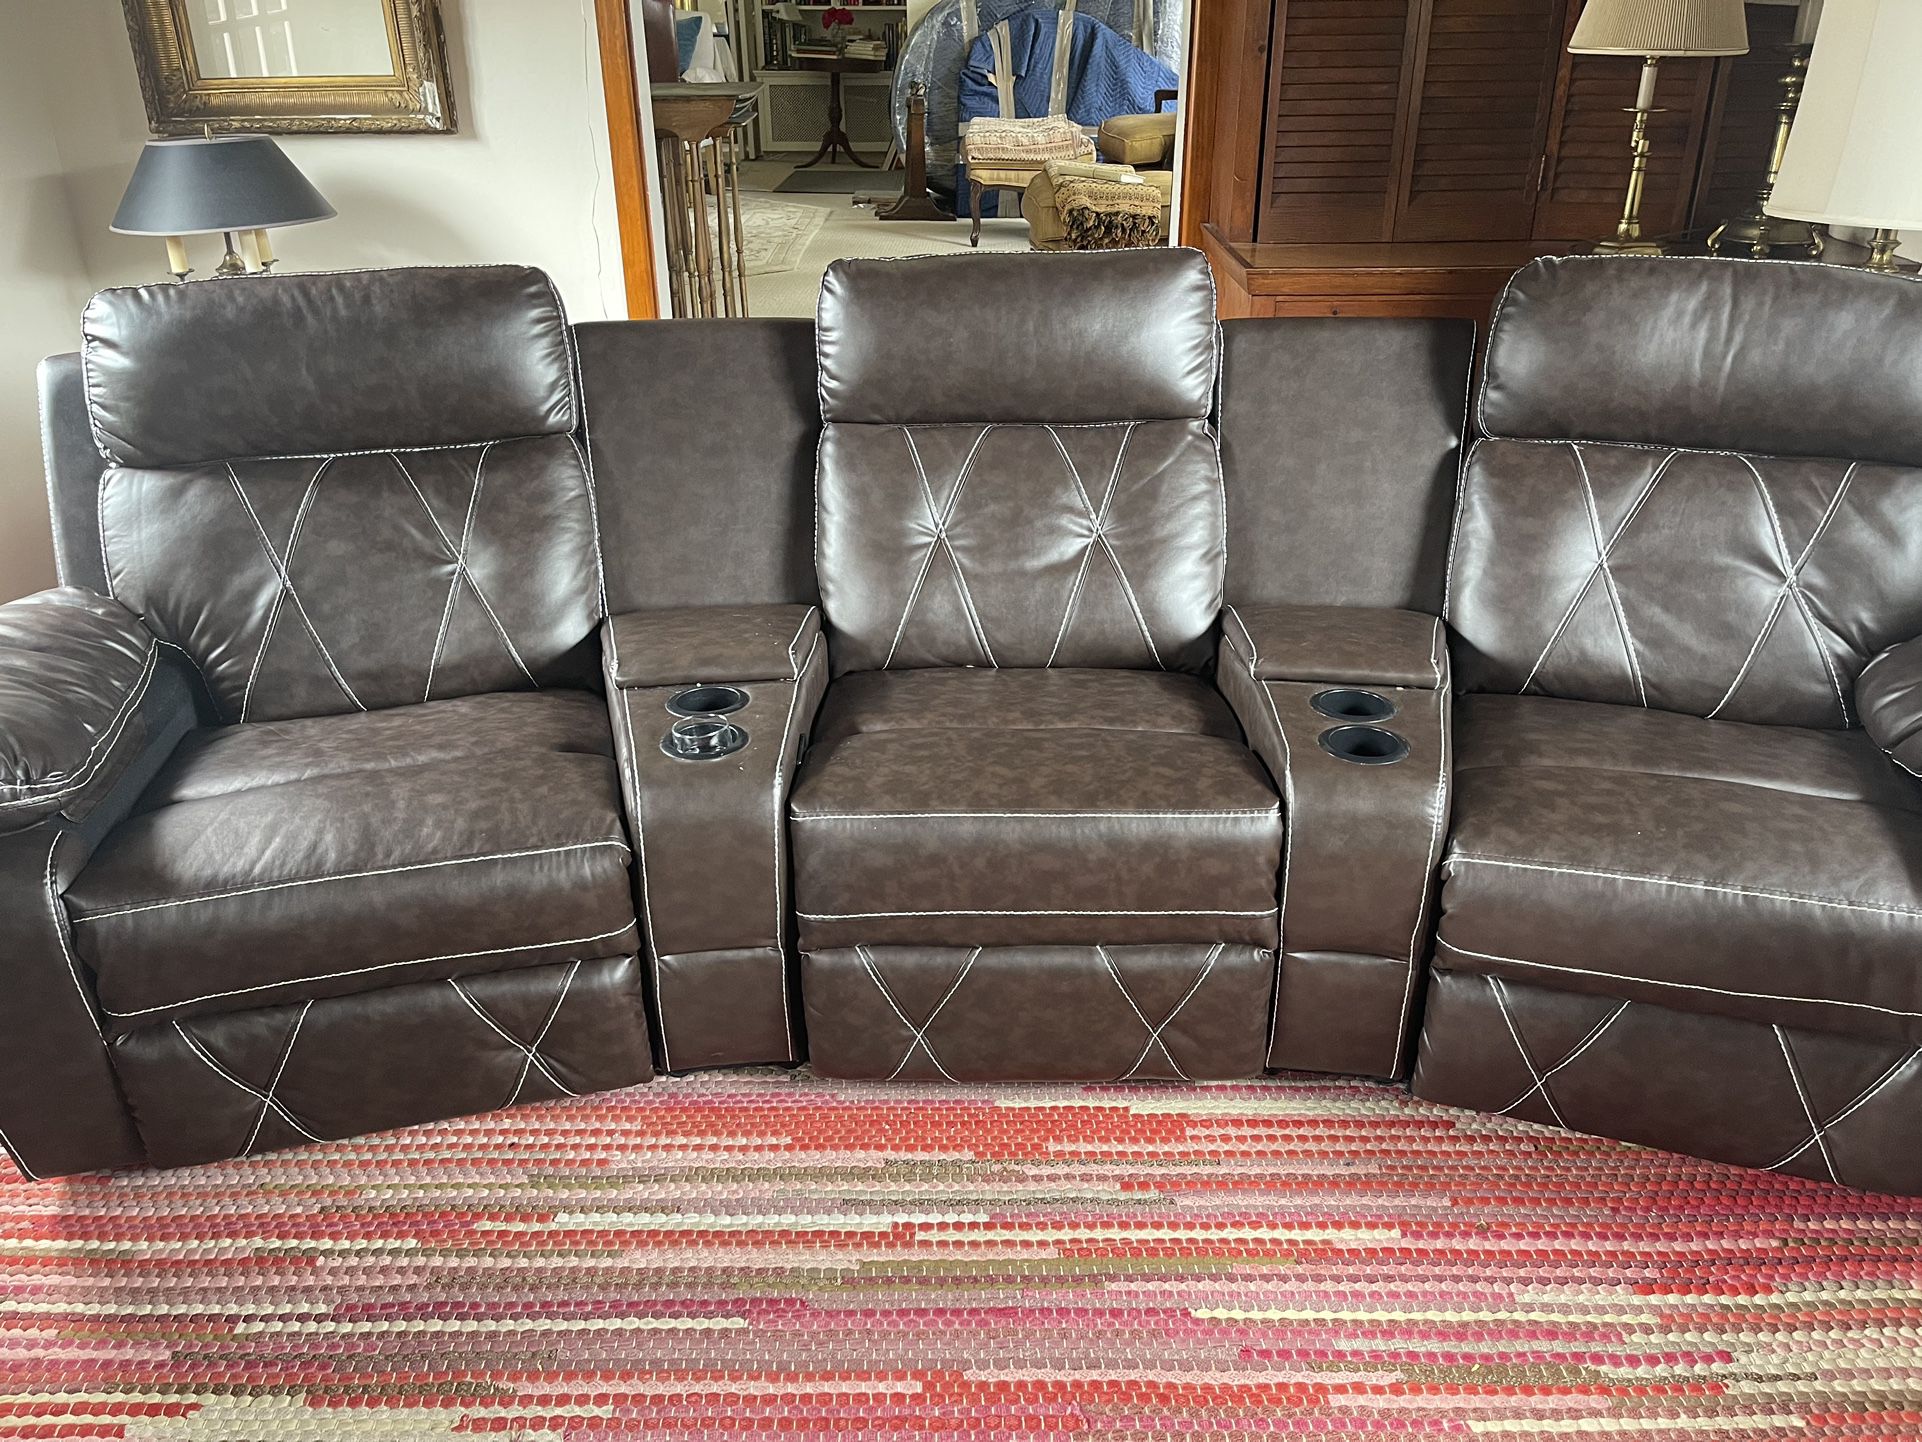 Home Theatre Seating Set